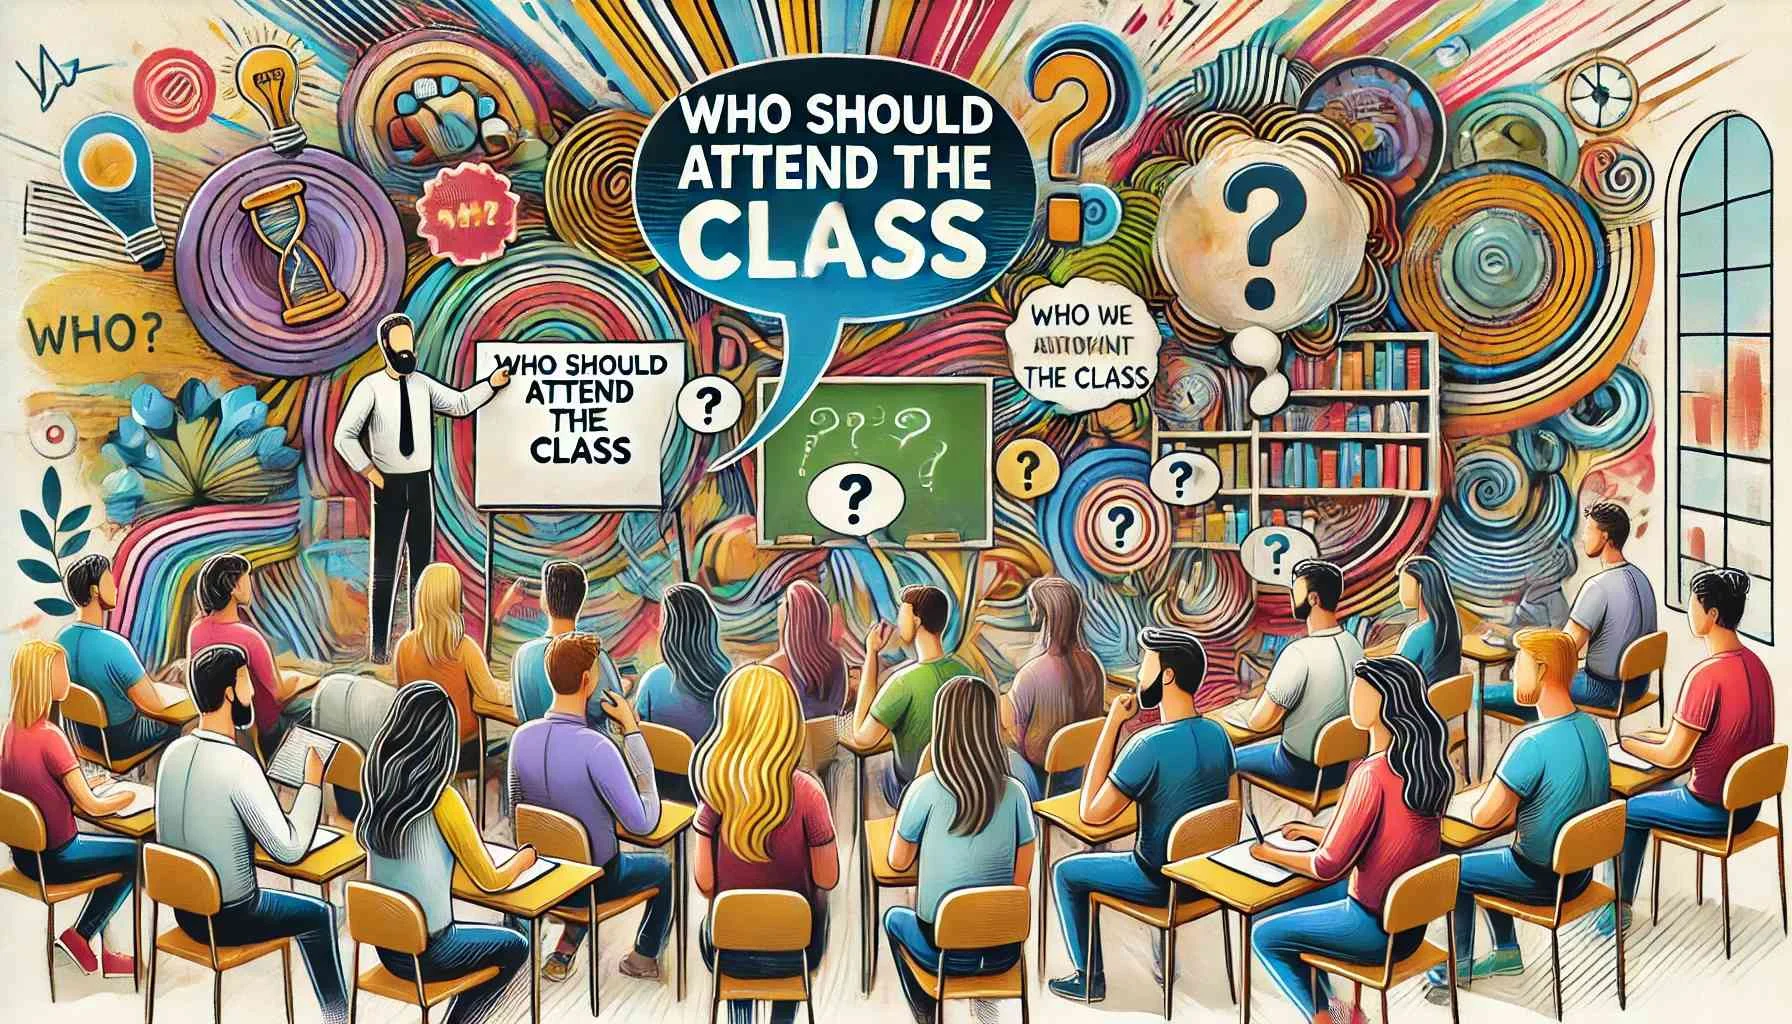 Tion Of Who Should Attend The Class Featuring Elements Like Diverse Groups Of People A Classroom Setting And Speech Bubbles 20240704 1502